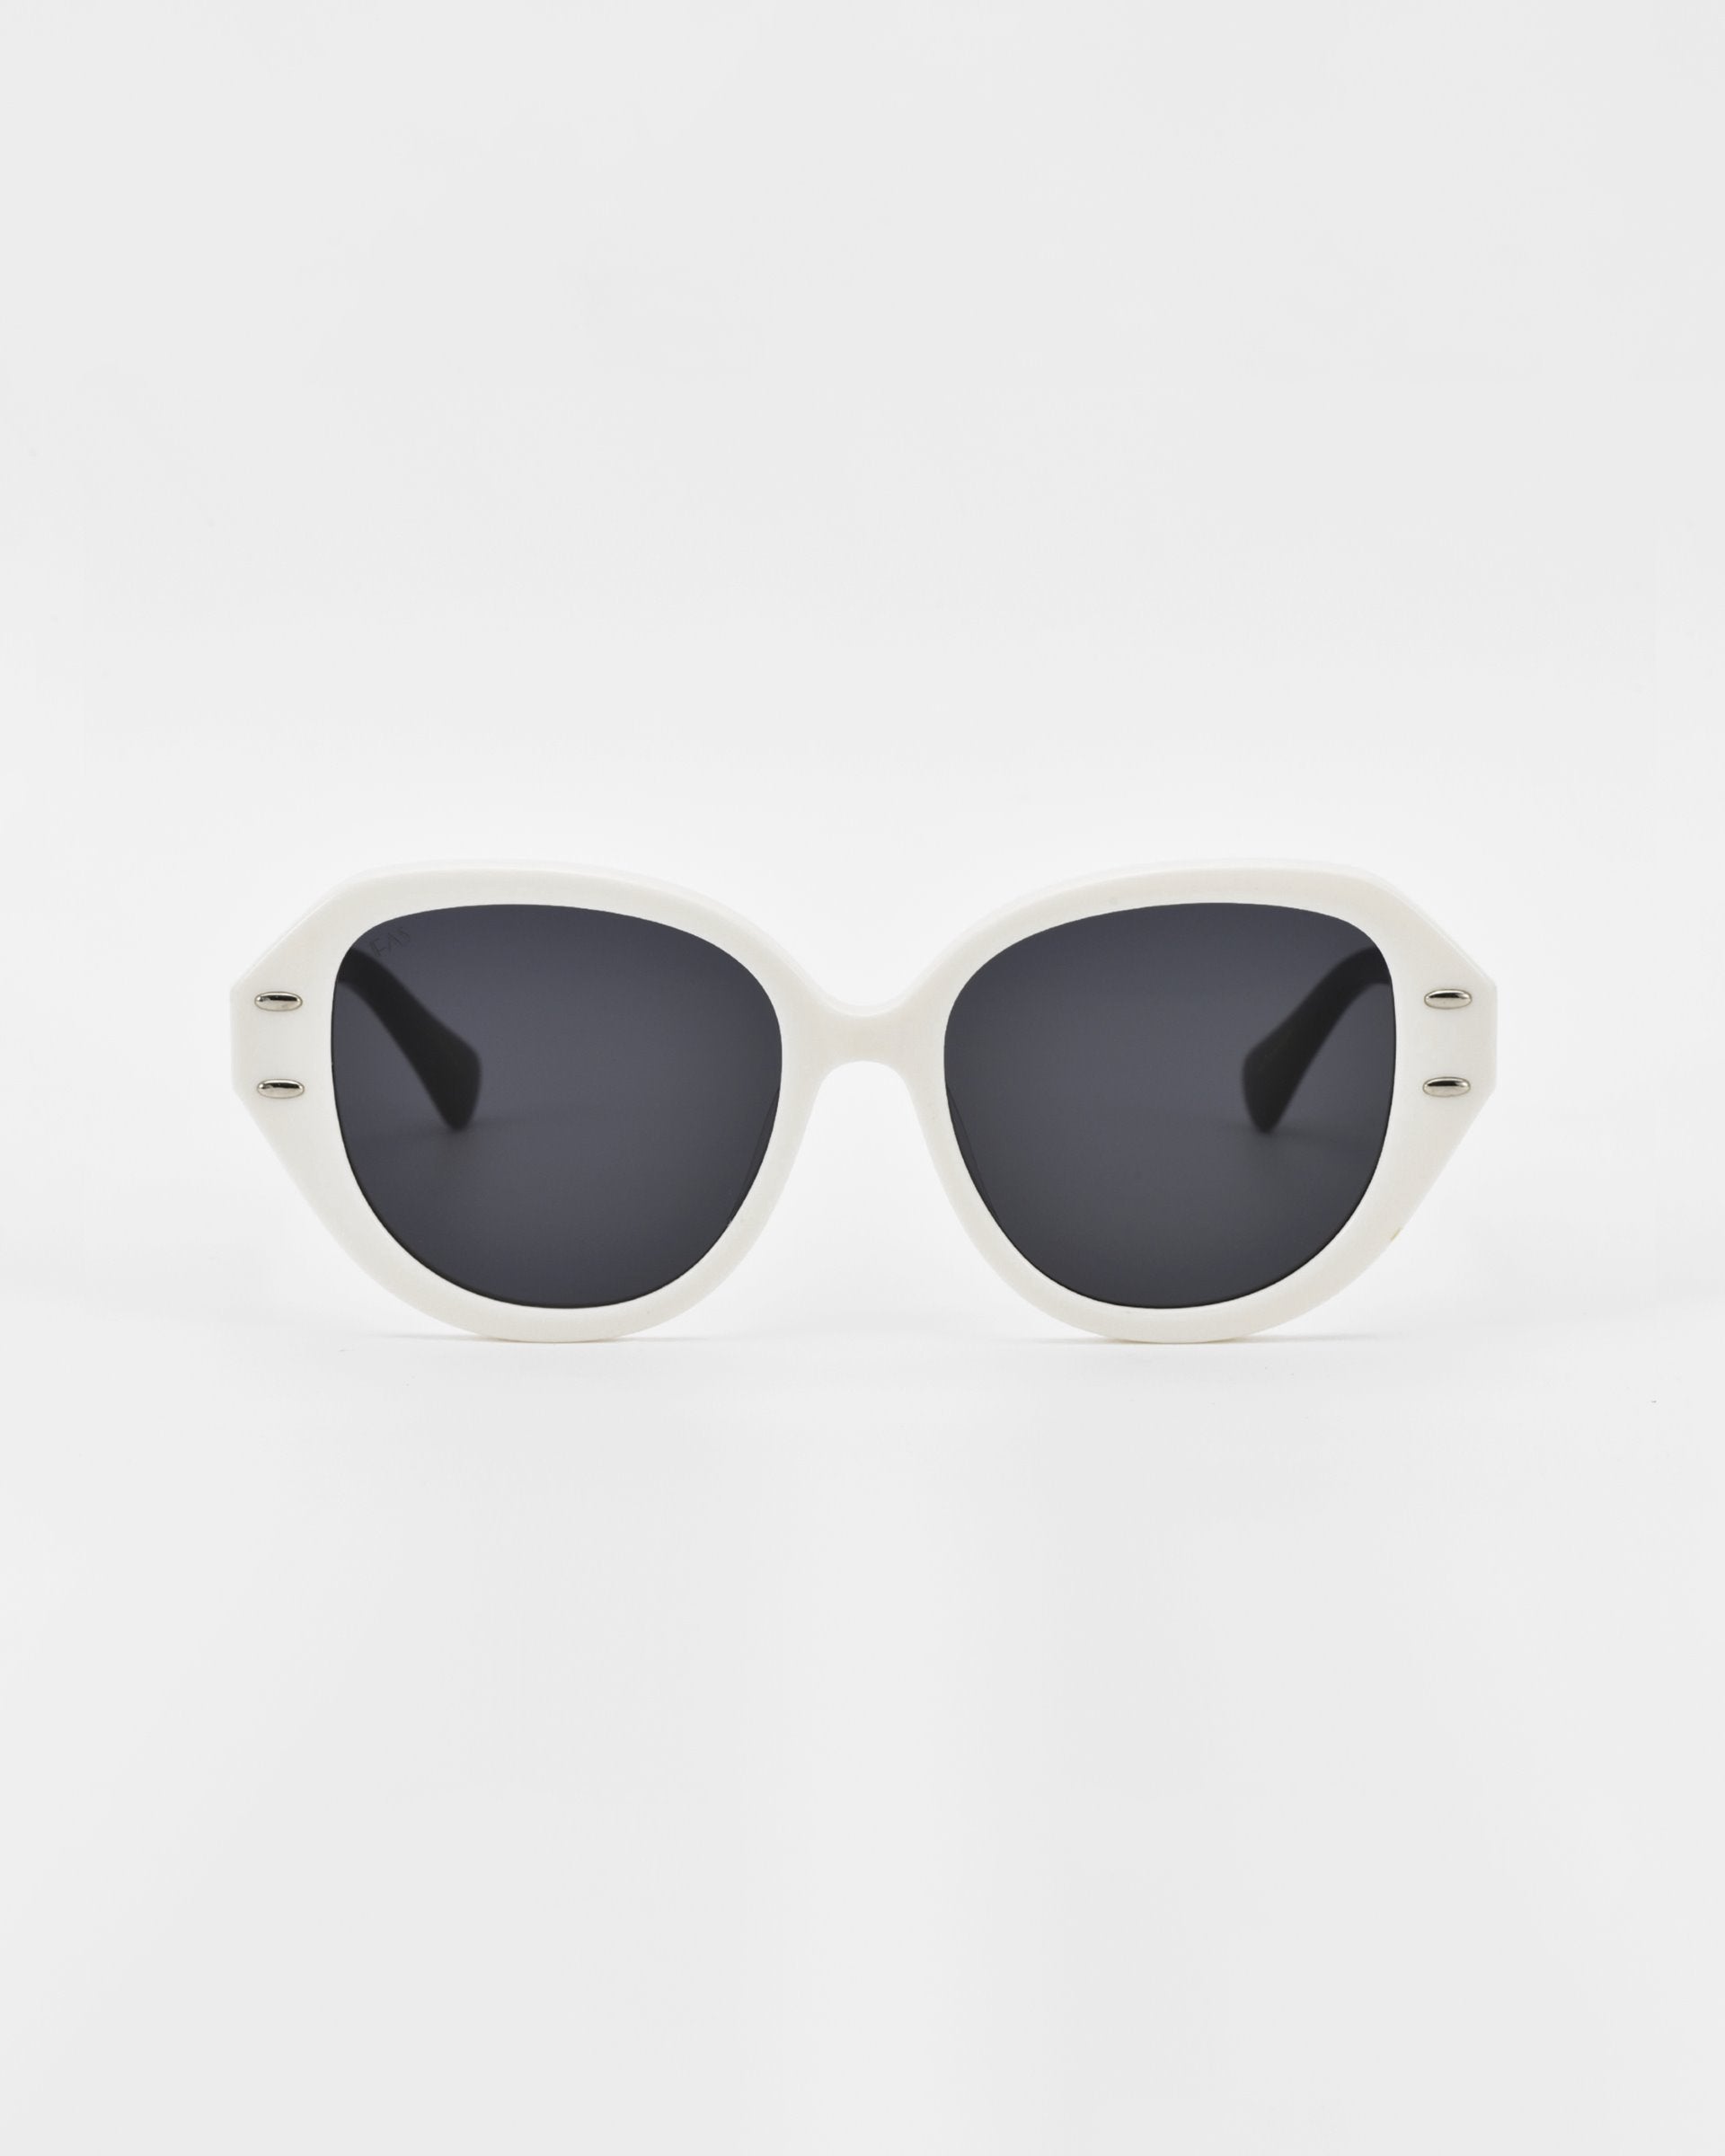 A pair of white-framed Mirage sunglasses by For Art's Sake® with black lenses, set against a plain white background. The design features rounded edges and a slightly retro style, crafted from plant-based acetate.